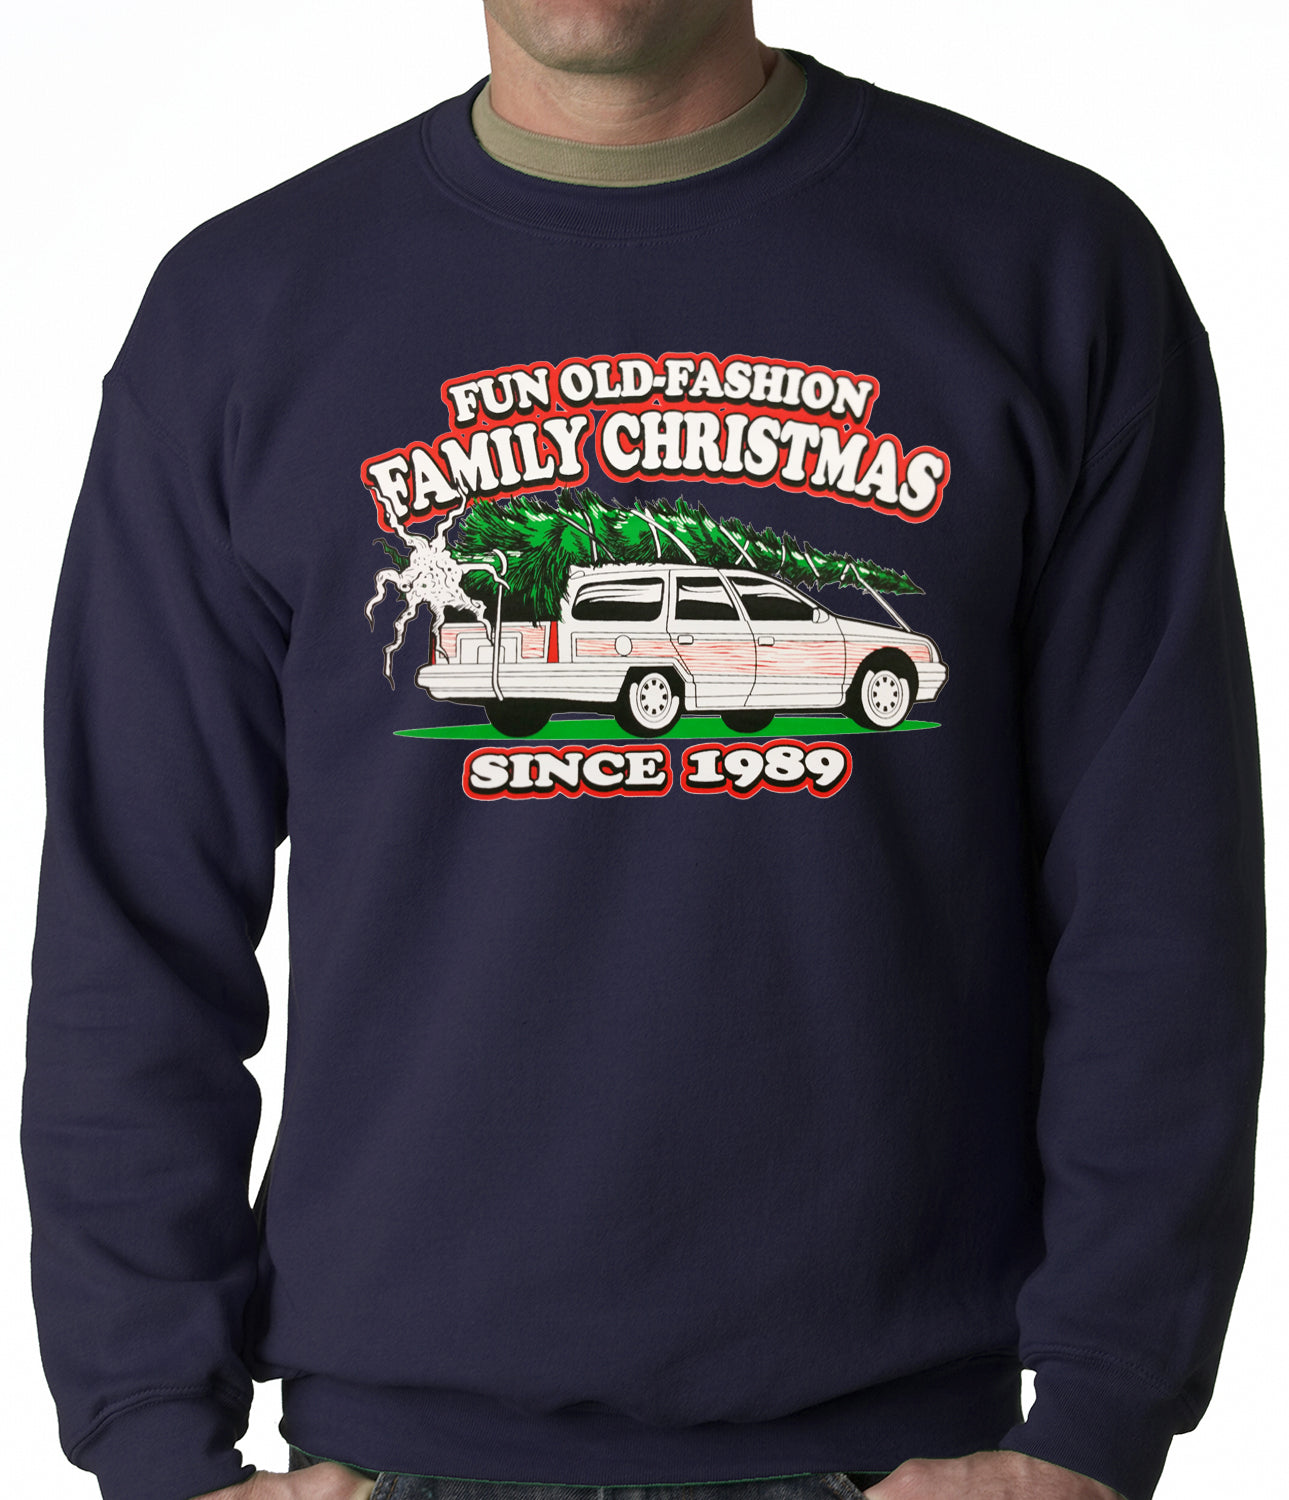 Fun Old-Fashioned Family Christmas Since 1989 Adult Crewneck